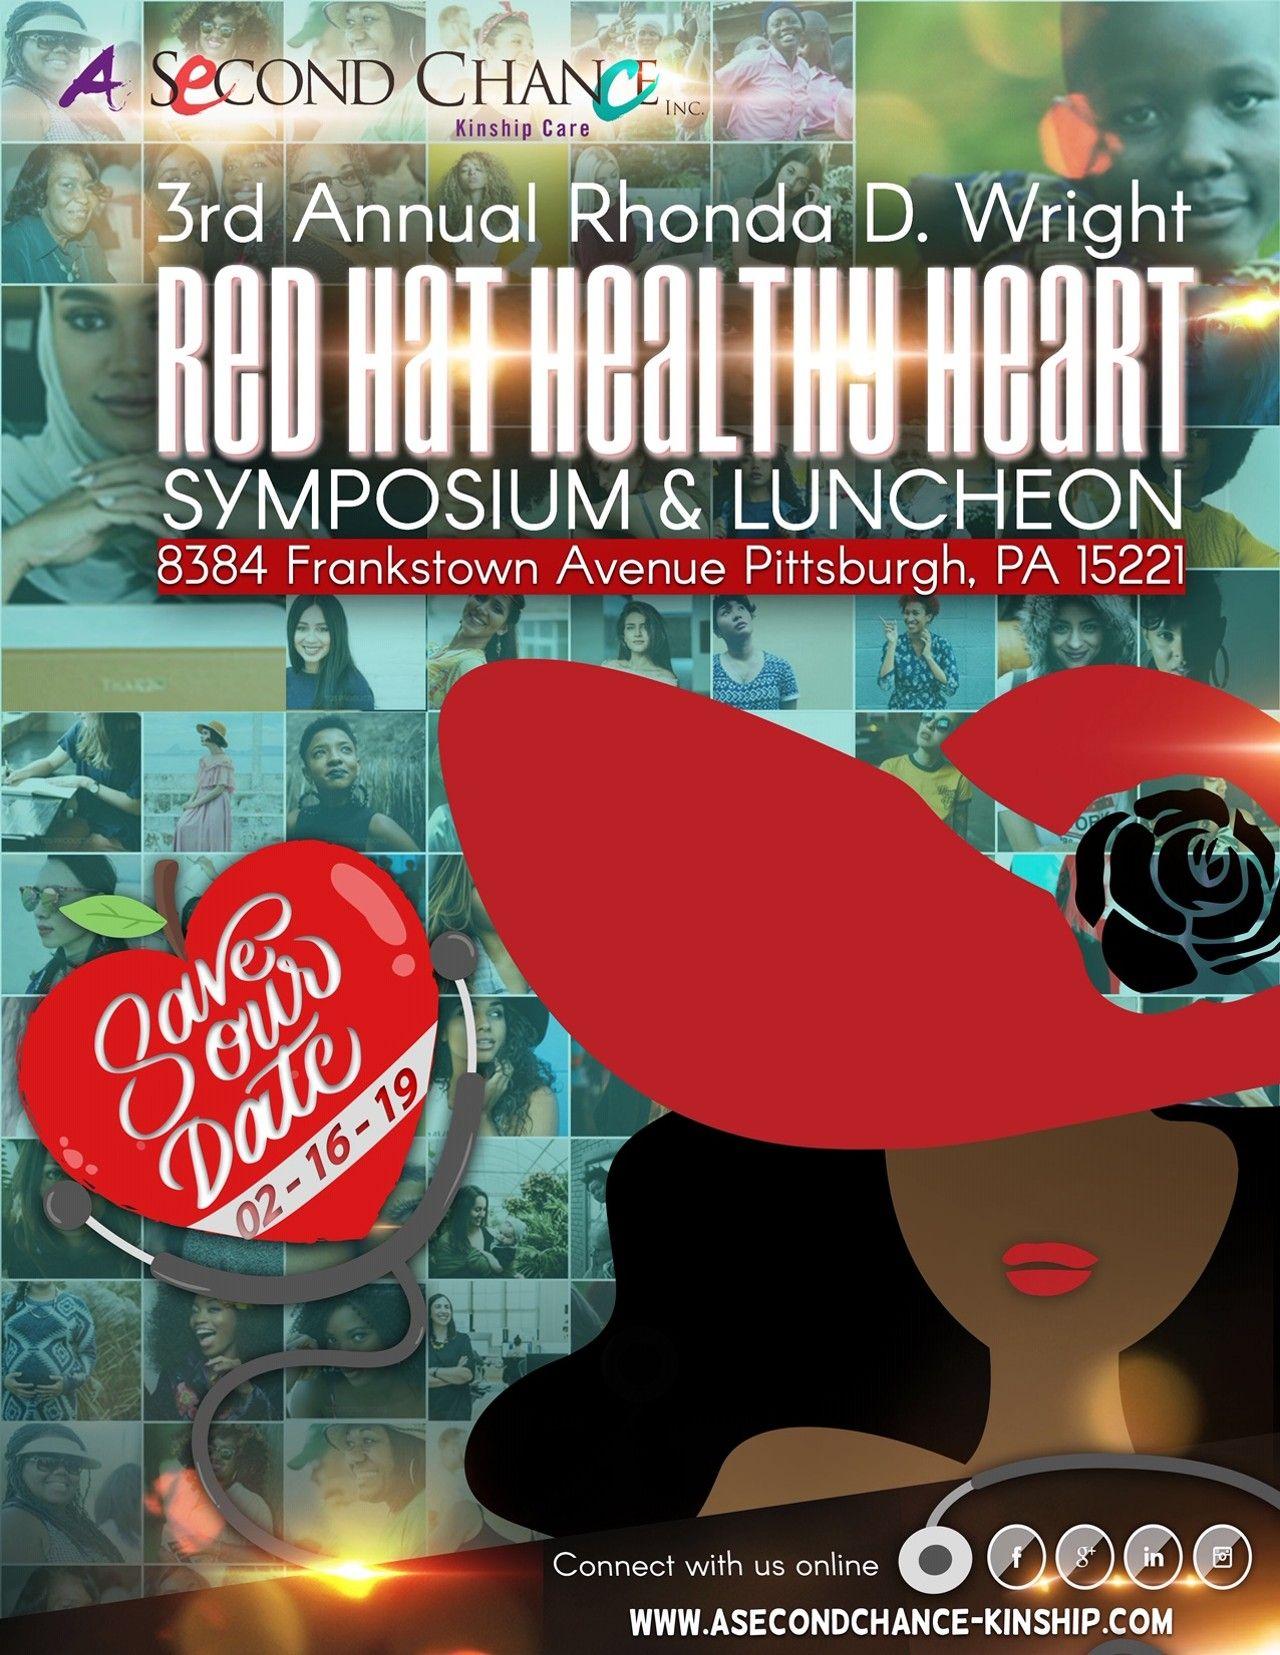 Heart Food and Drink Logo - 3rd Annual Rhonda D. Wright Red Hat Healthy Heart Symposium ...